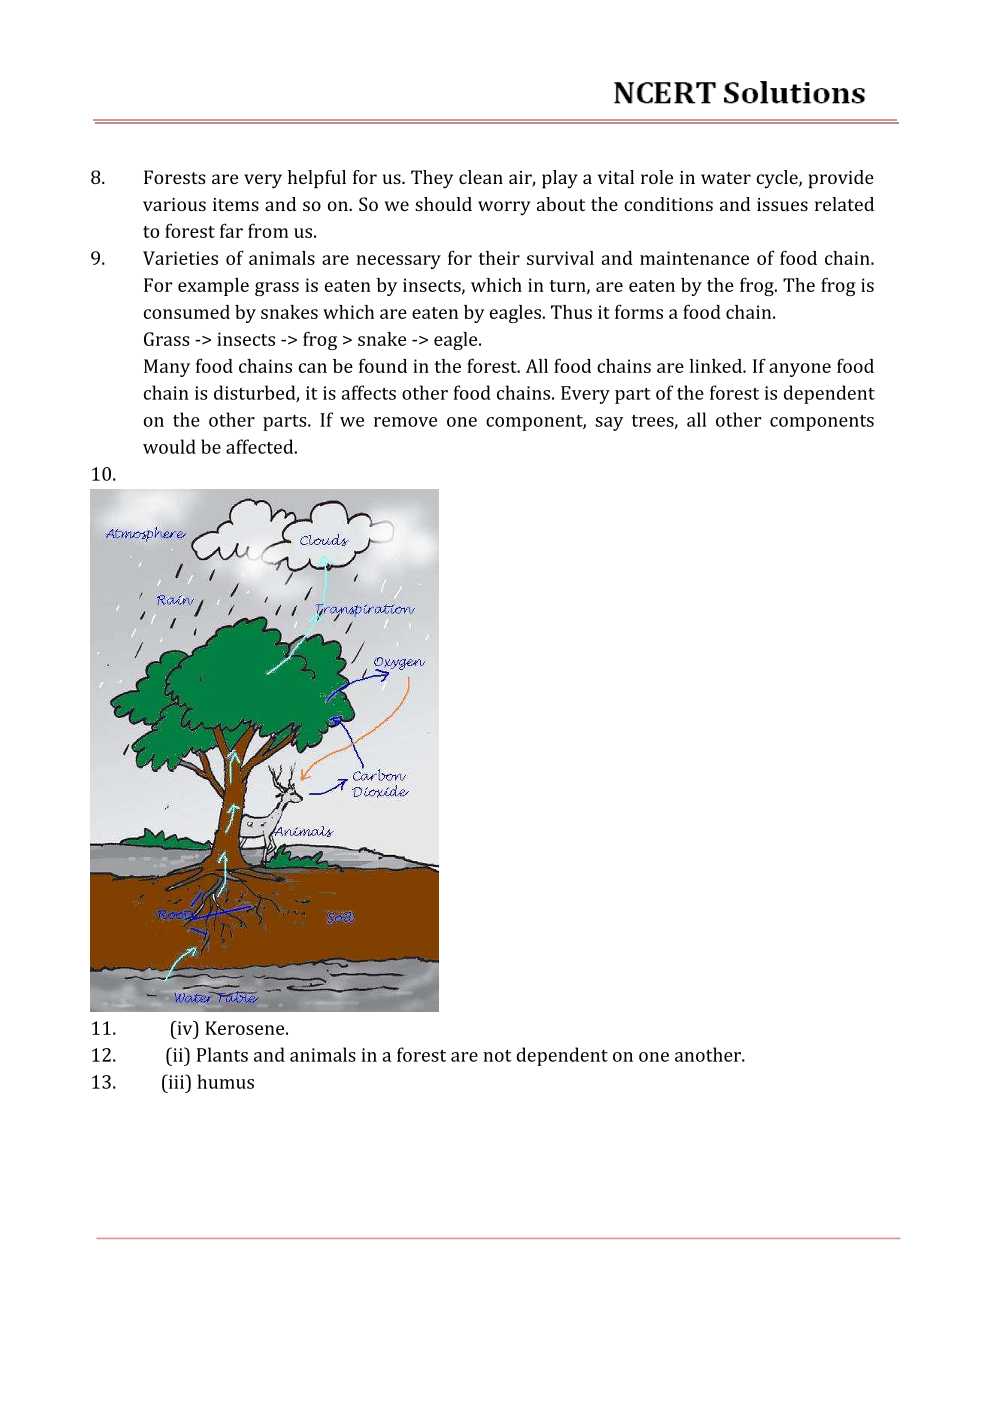 NCERT Solutions For Class 7 science Chapter 17 Forests – Our Lifeline